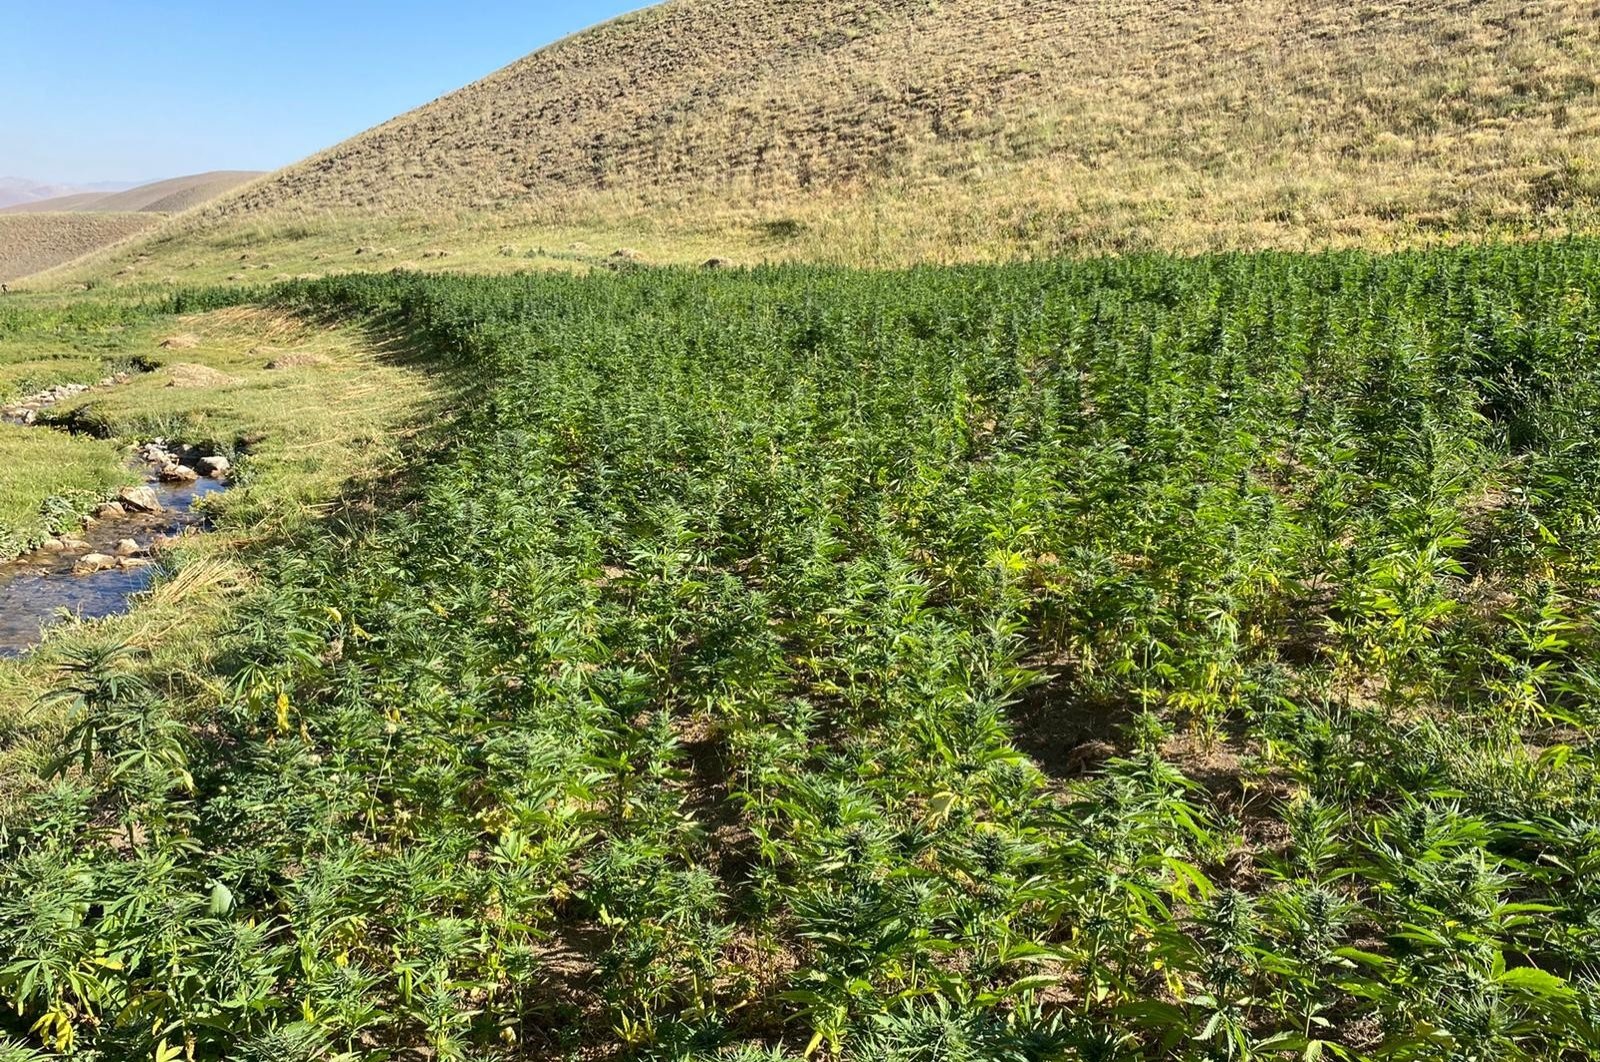 Seized cannabis gardens in the countryside of Van province, Aug. 22, 2020. (IHA Photo)